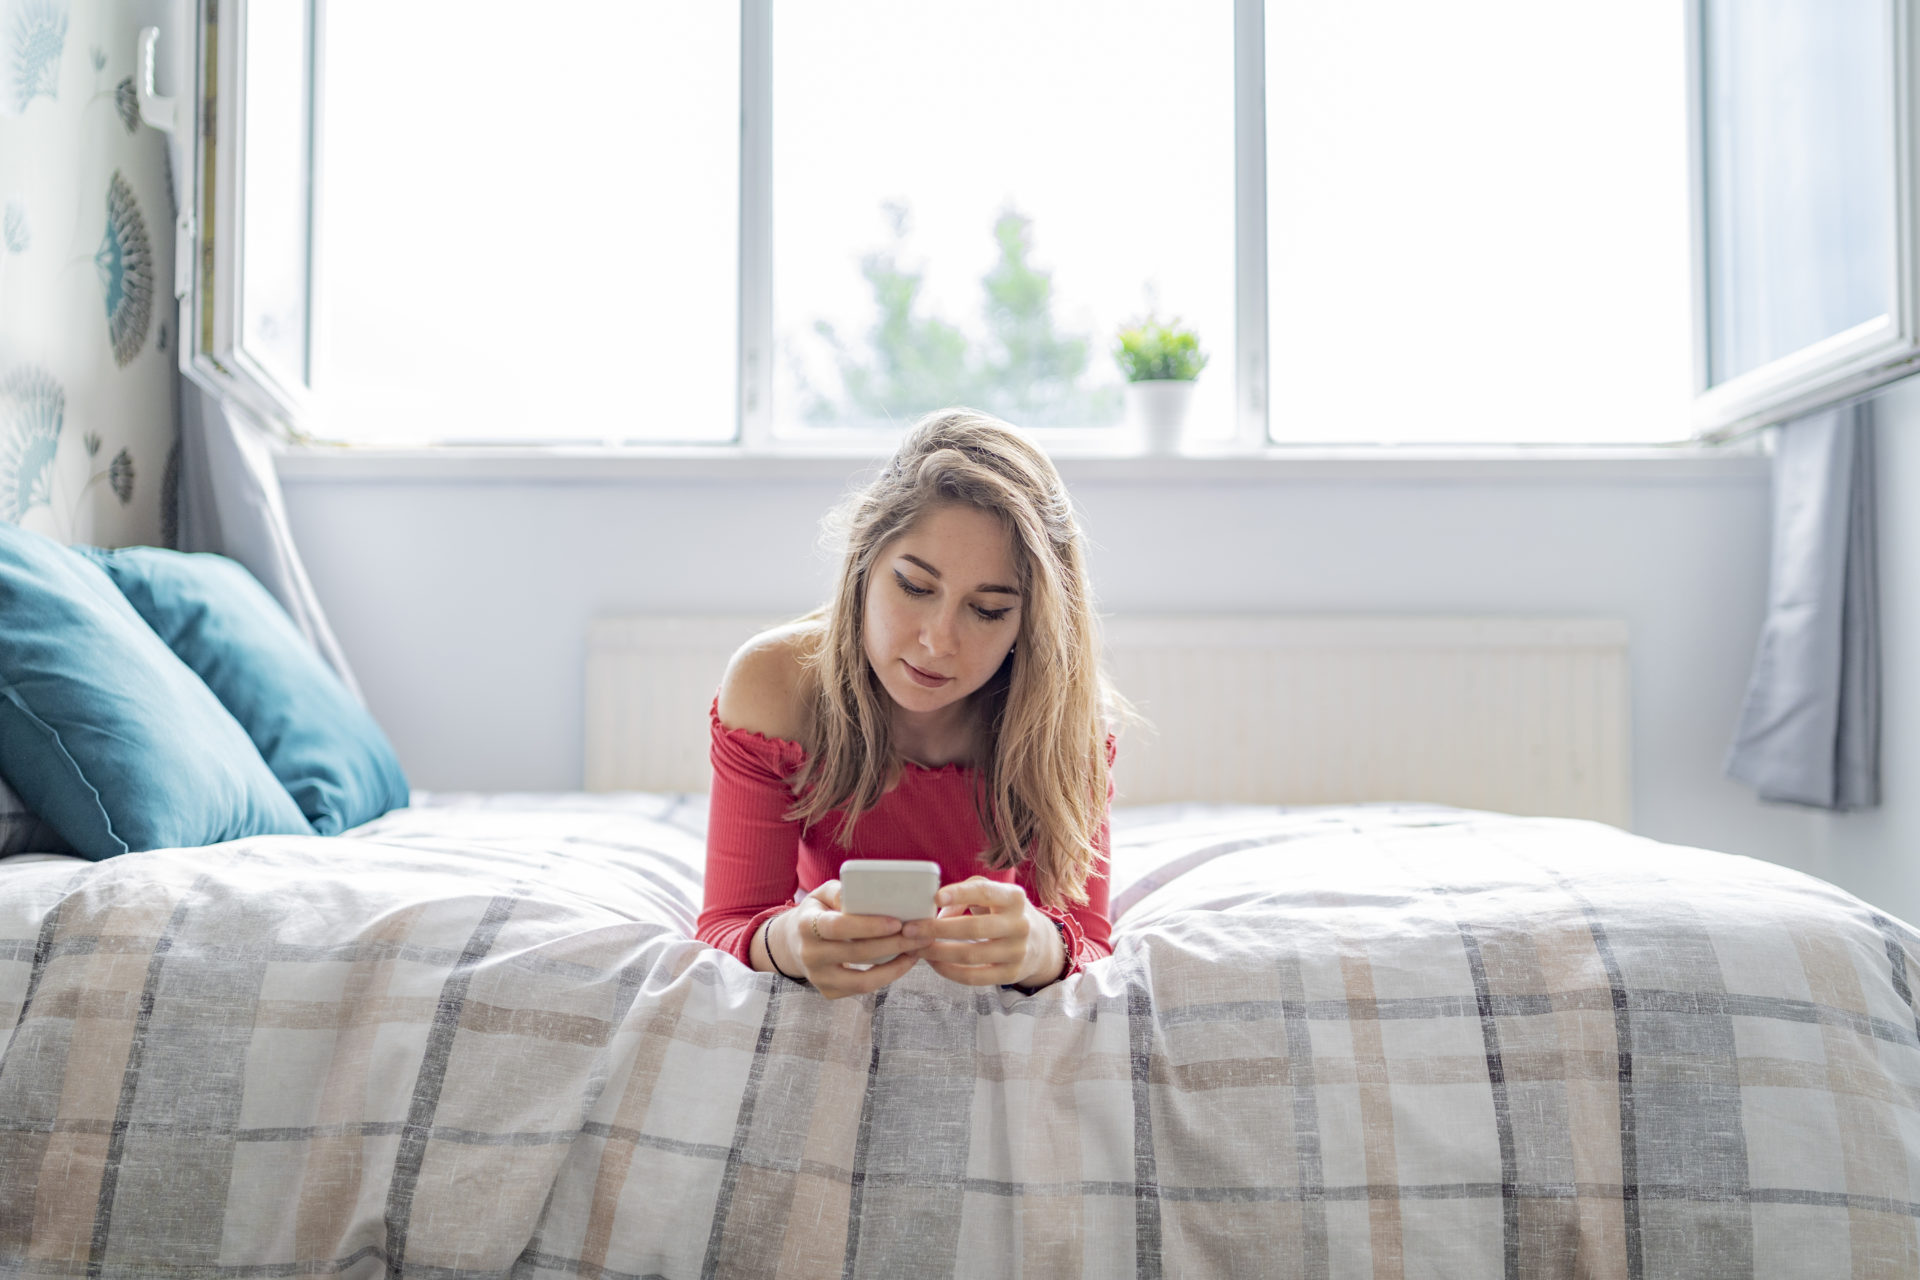 single woman looking at online dating profiles on her phone in bed